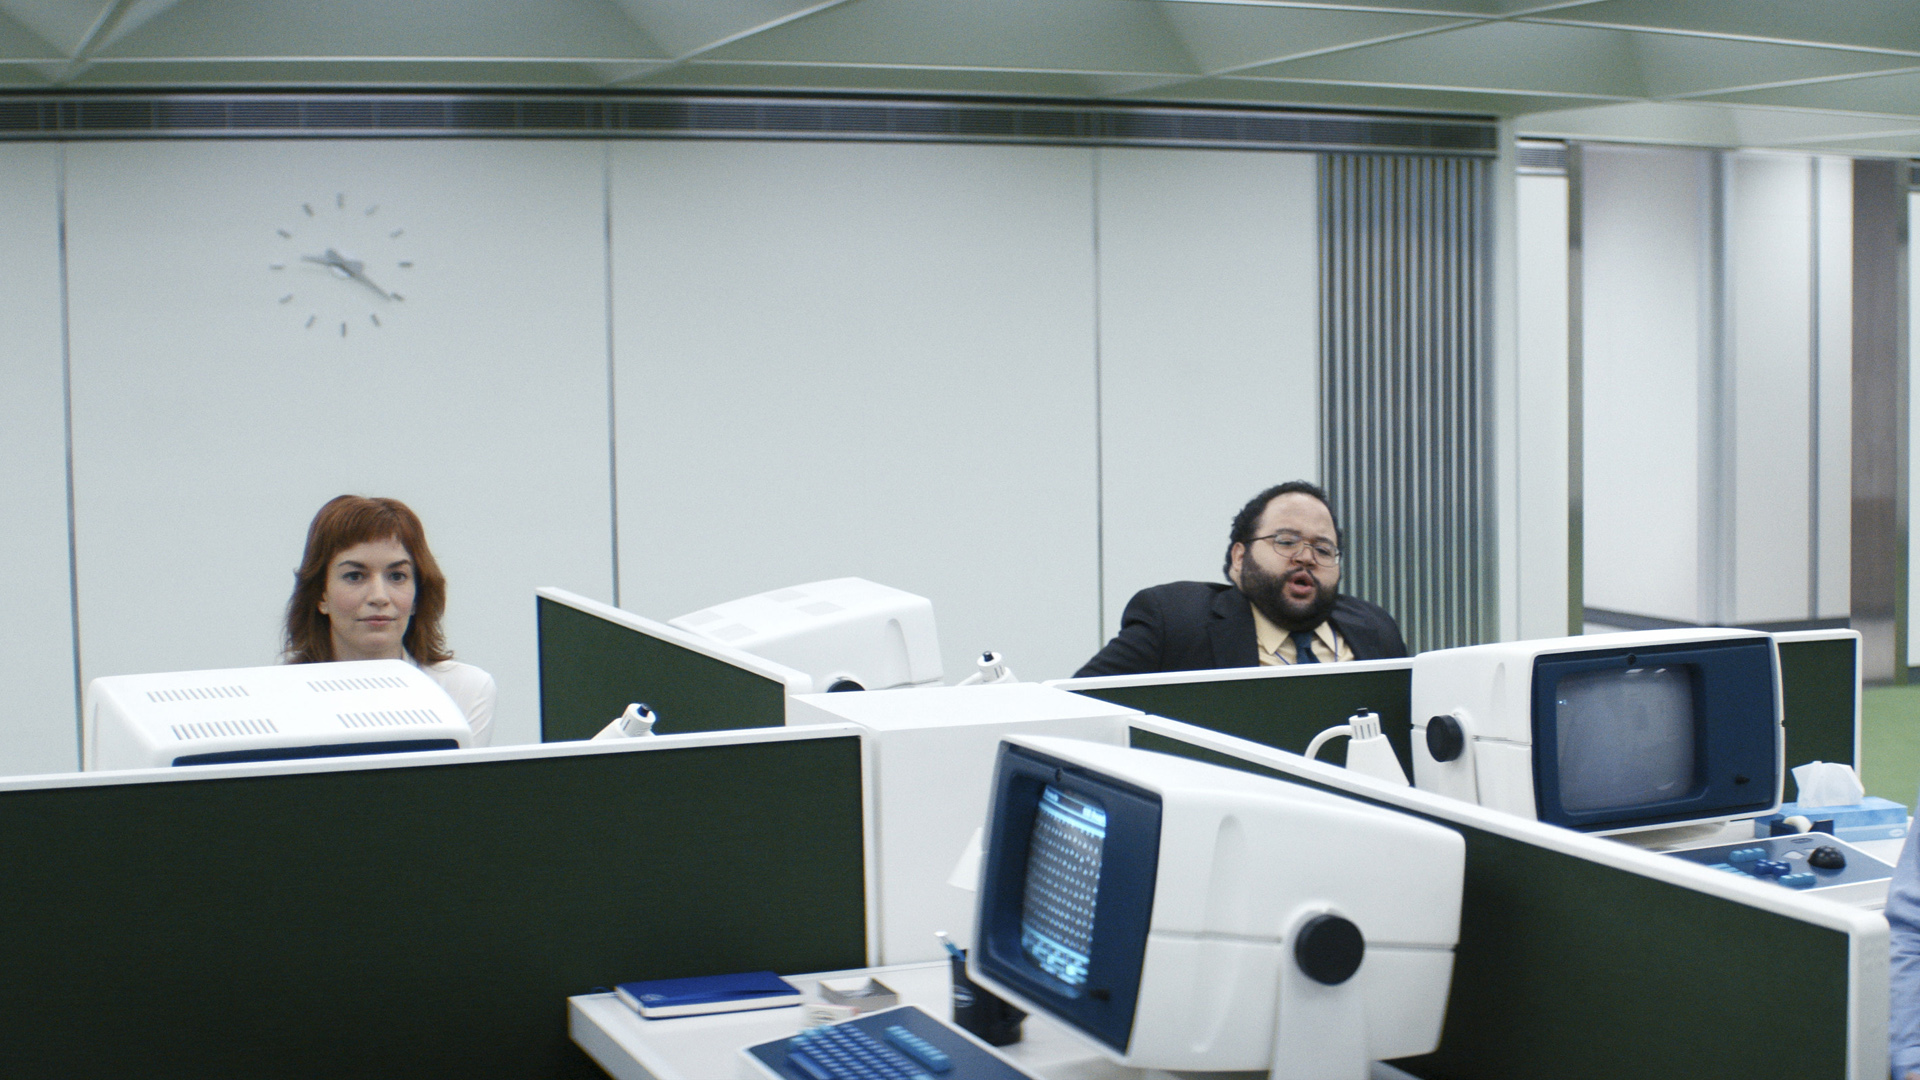 Two Lumon Industries employees look up from their desks in Severance season 1